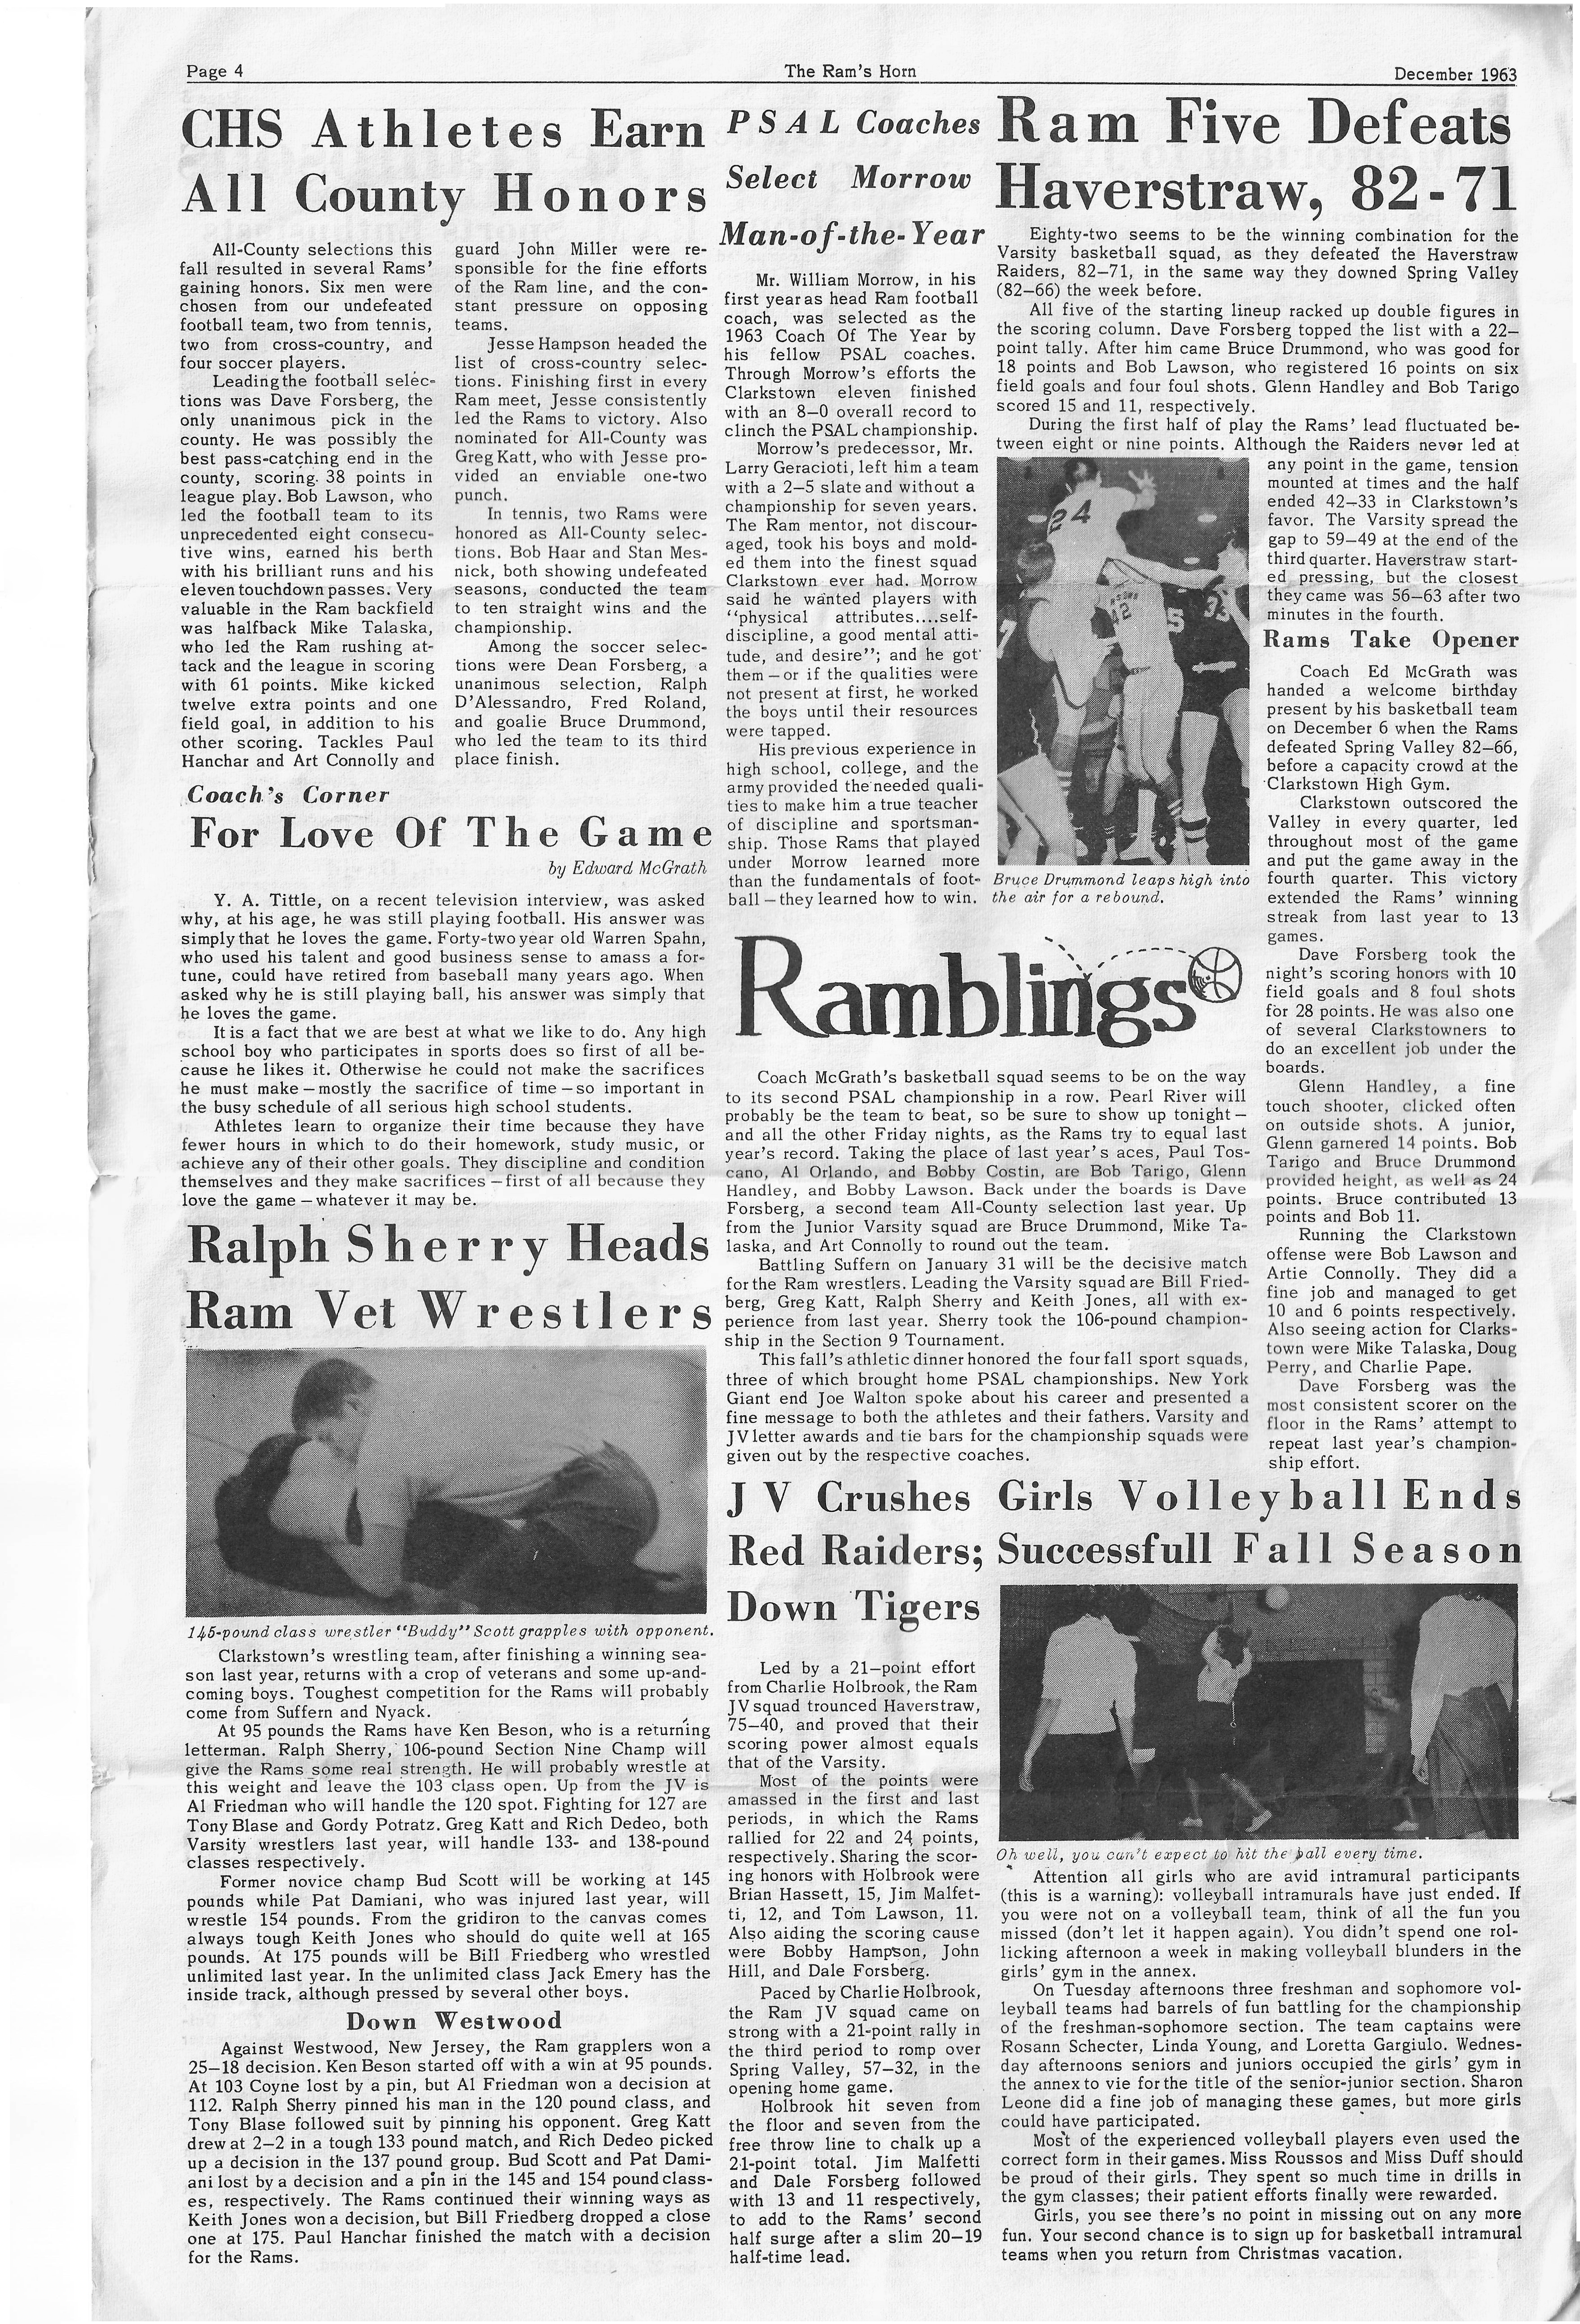 The Ram's Horn - Dec. '63 - Page 4